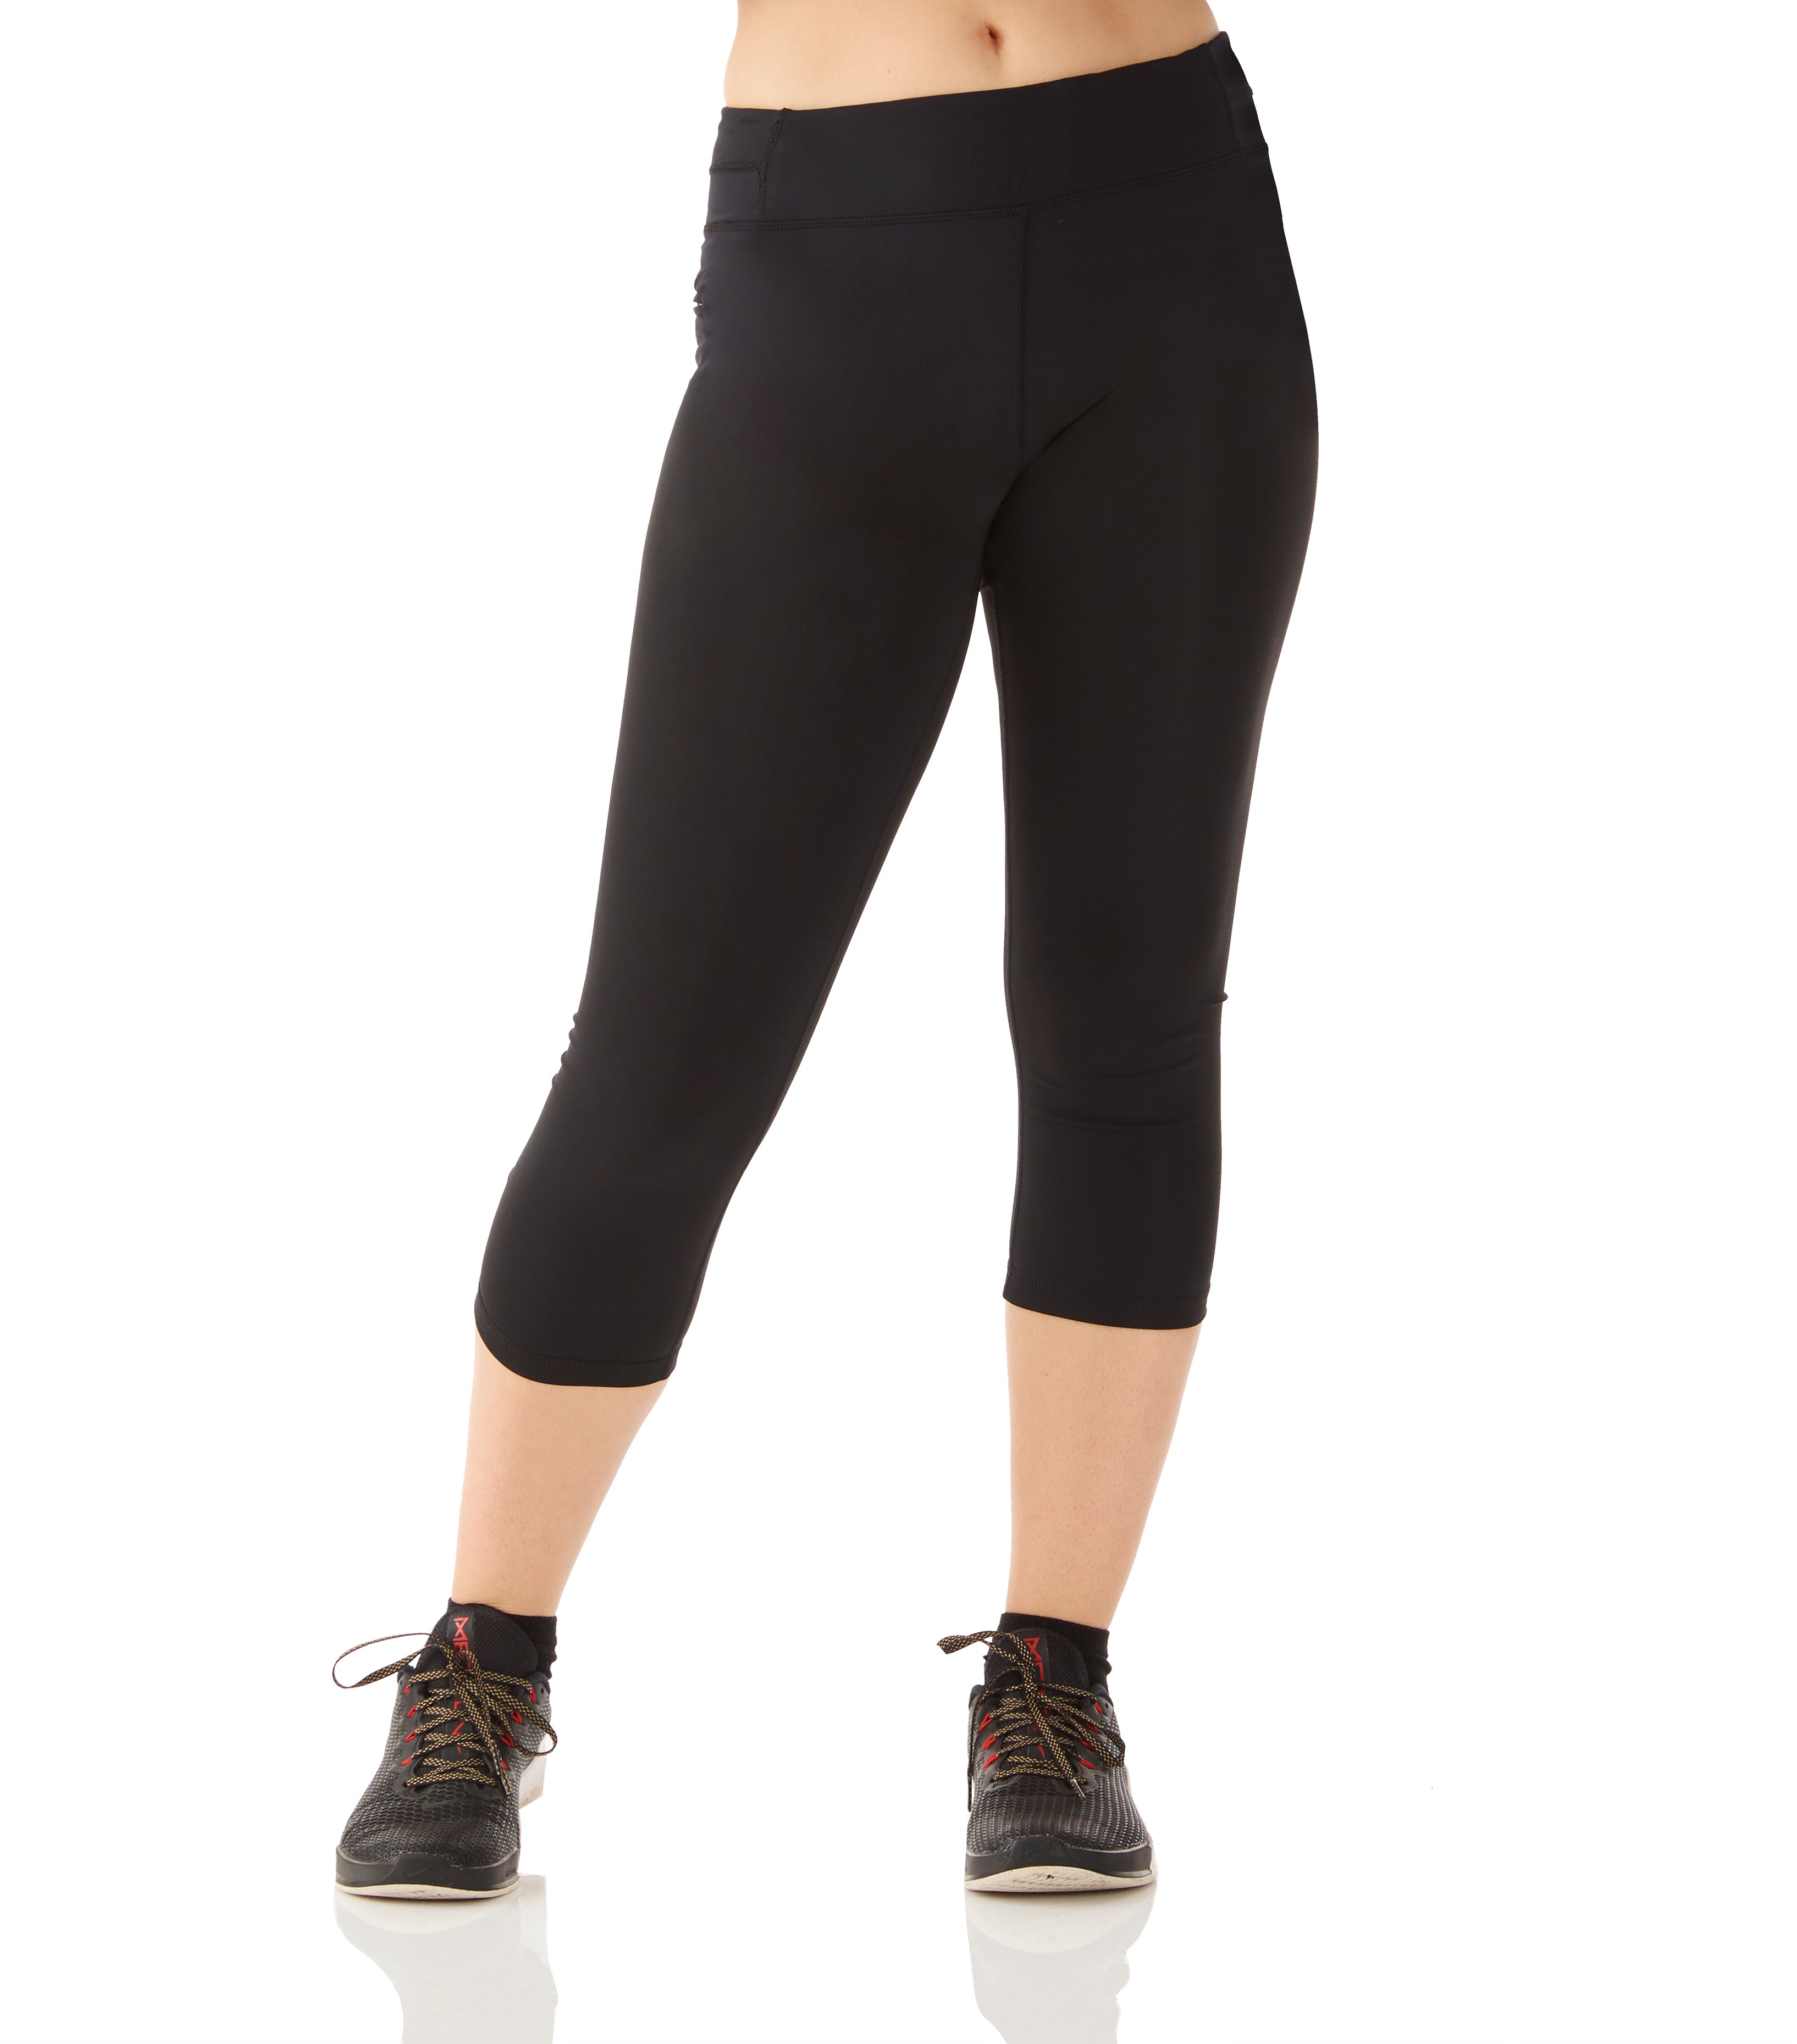 Women's High-Rise 3/4 Compression Tights